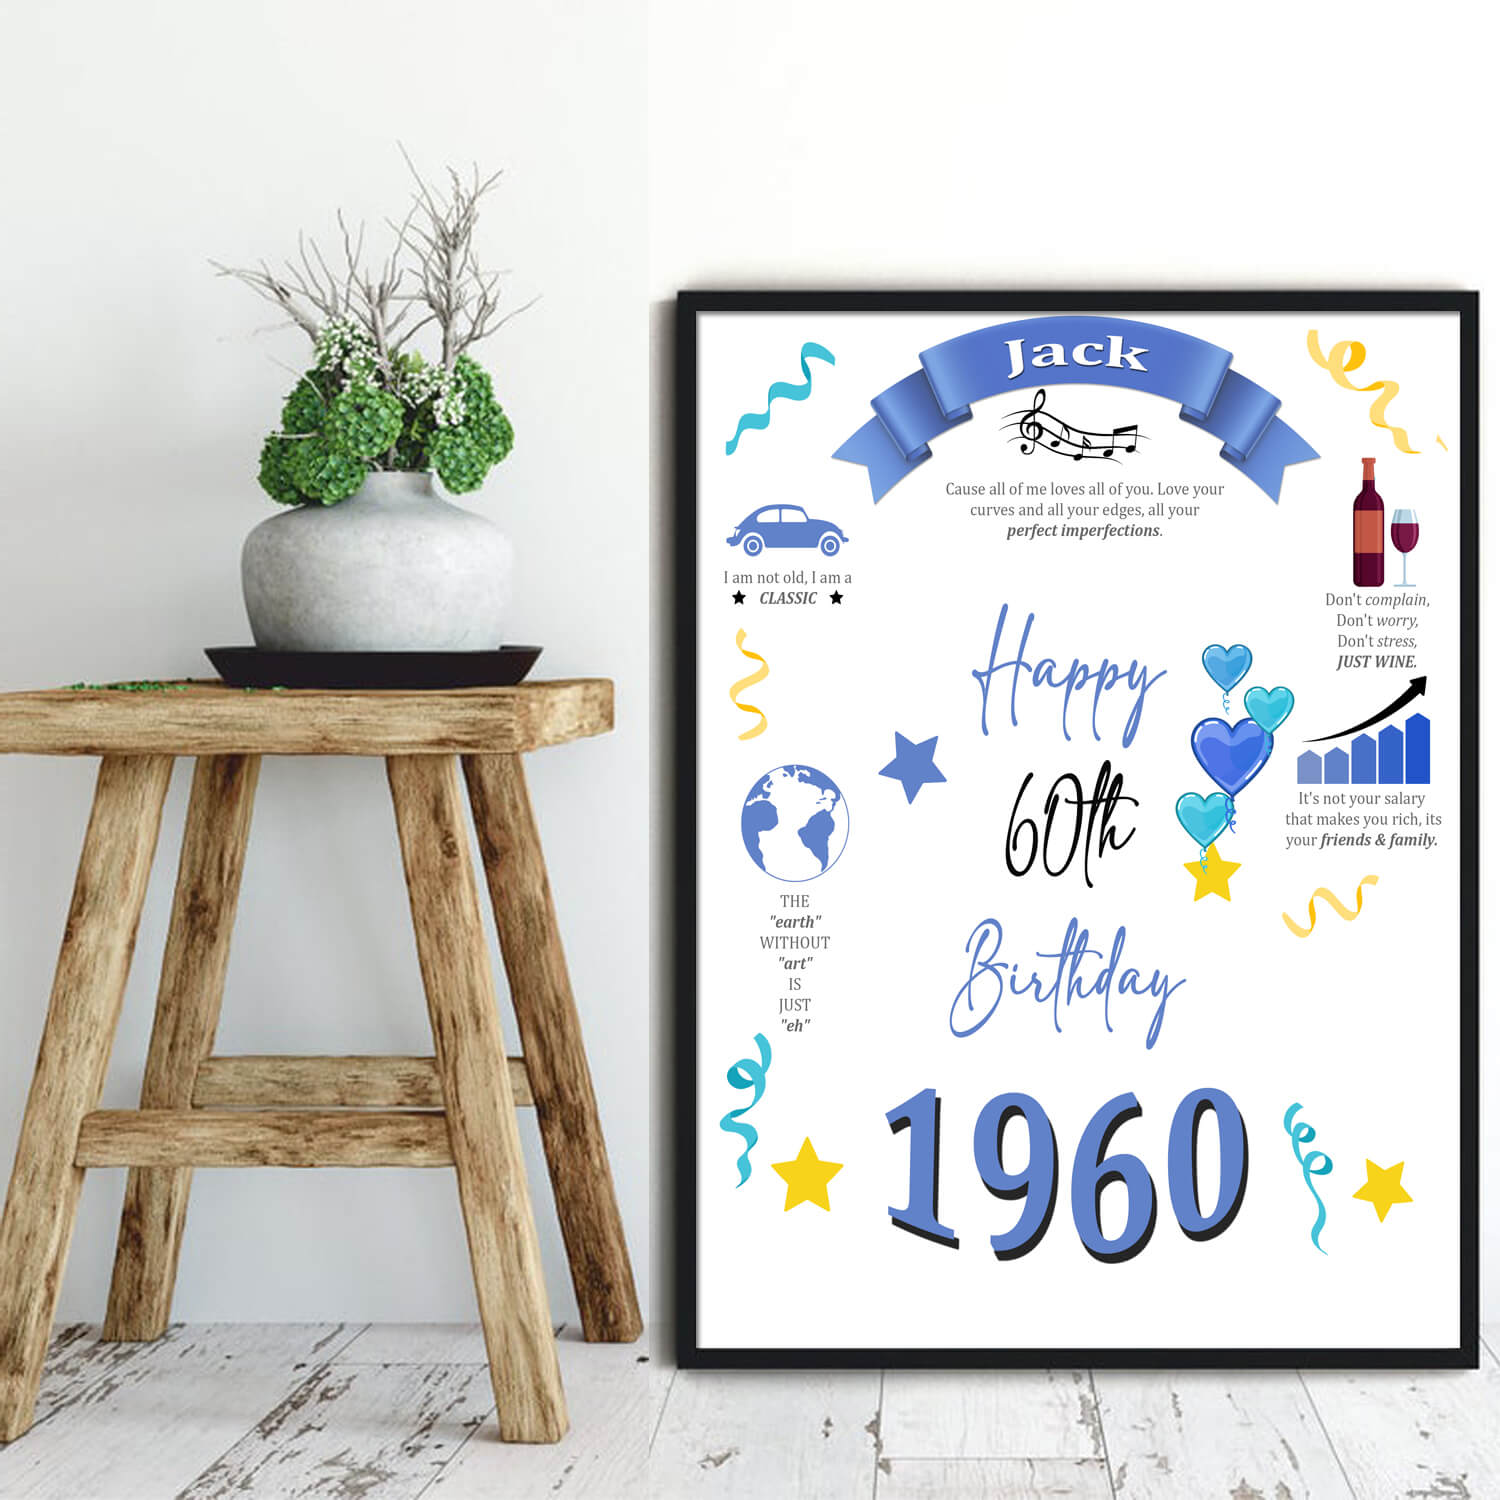 Happy Birthday Poster with Quotes - digital